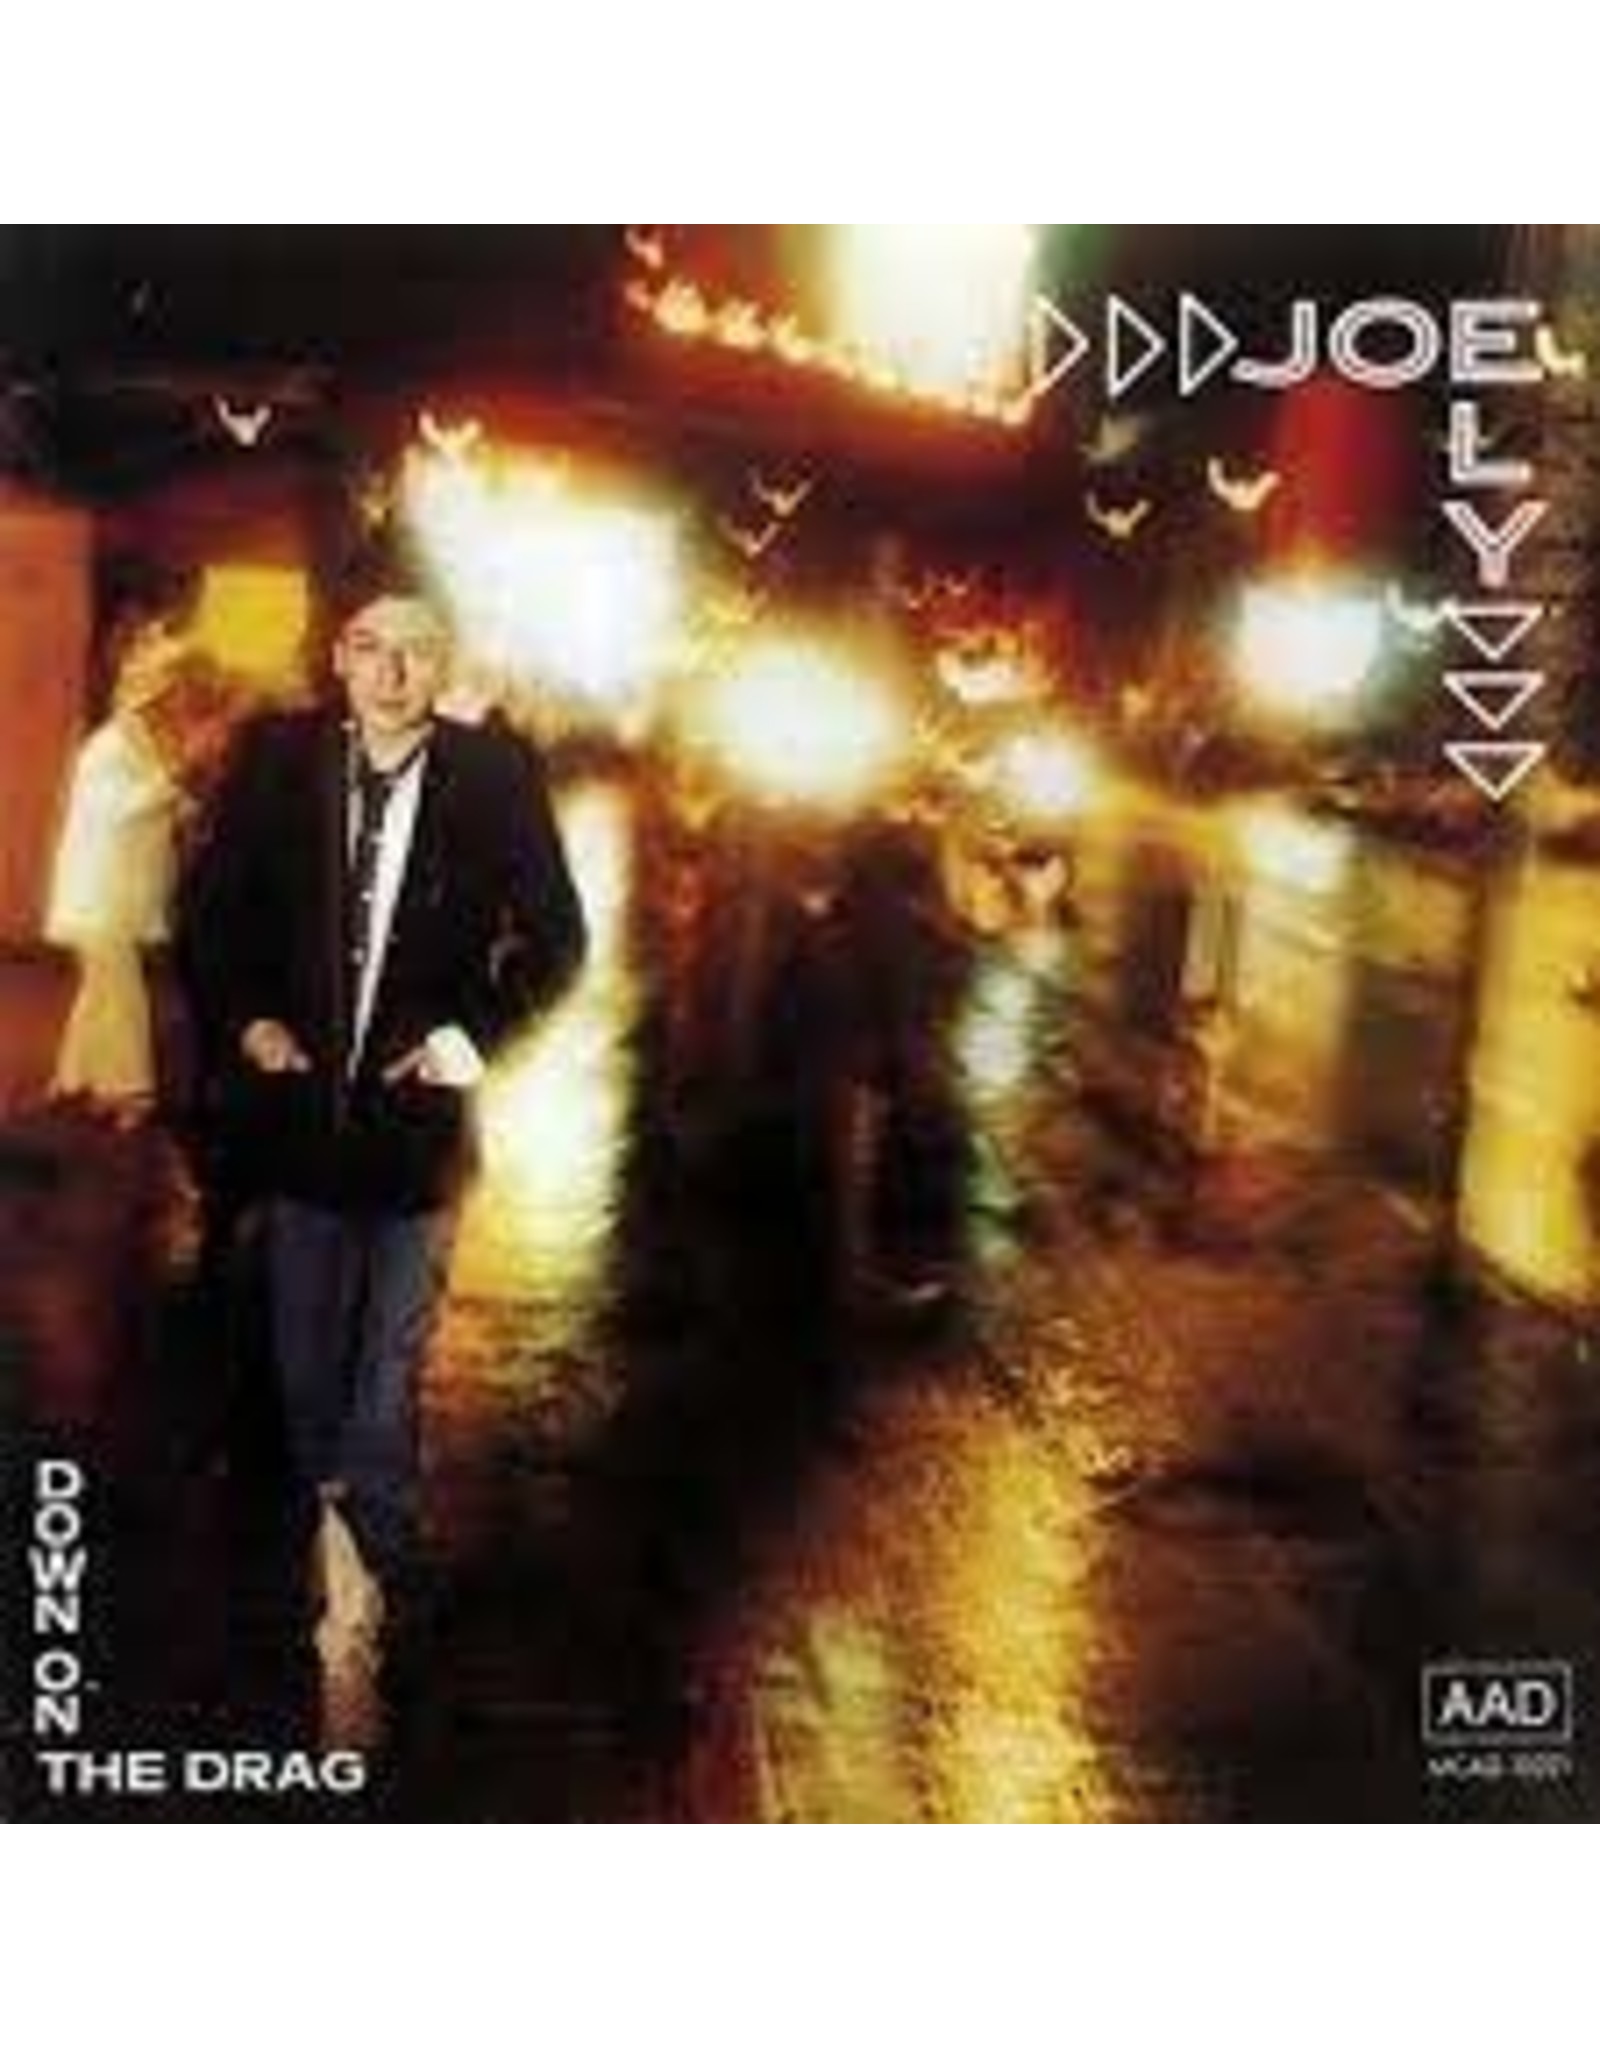 Ely, Joe - Down On The Drag LP (180g/remastered)